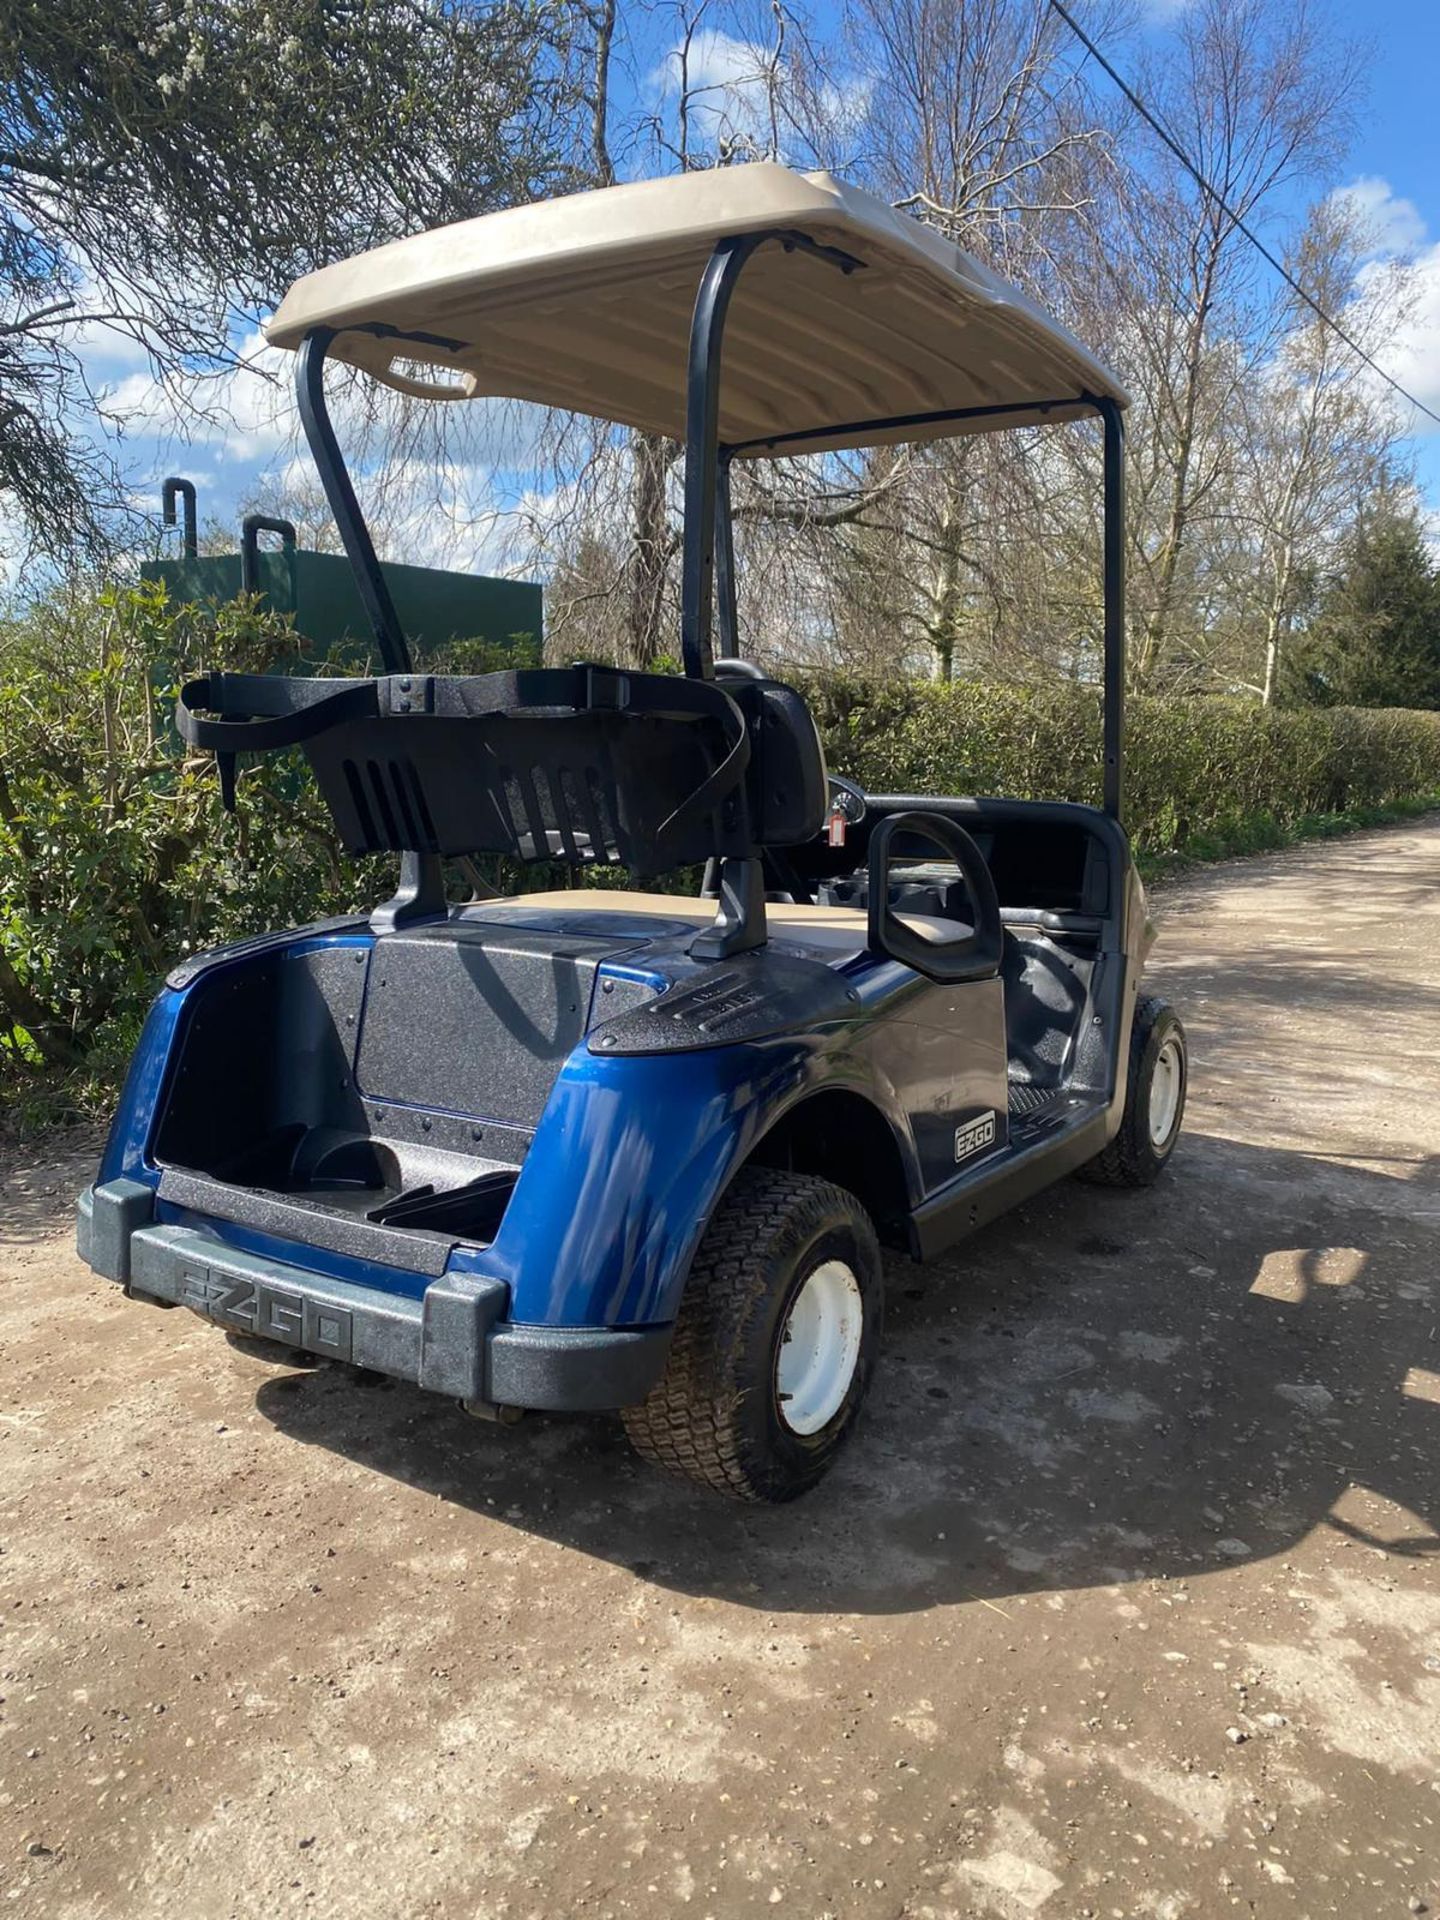 EZ-GO RXV GOLF CART BATTERY OPERATED, RUNS AND DRIVES, GOOD TYRES ALL ROUND *PLUS VAT* - Image 8 of 9